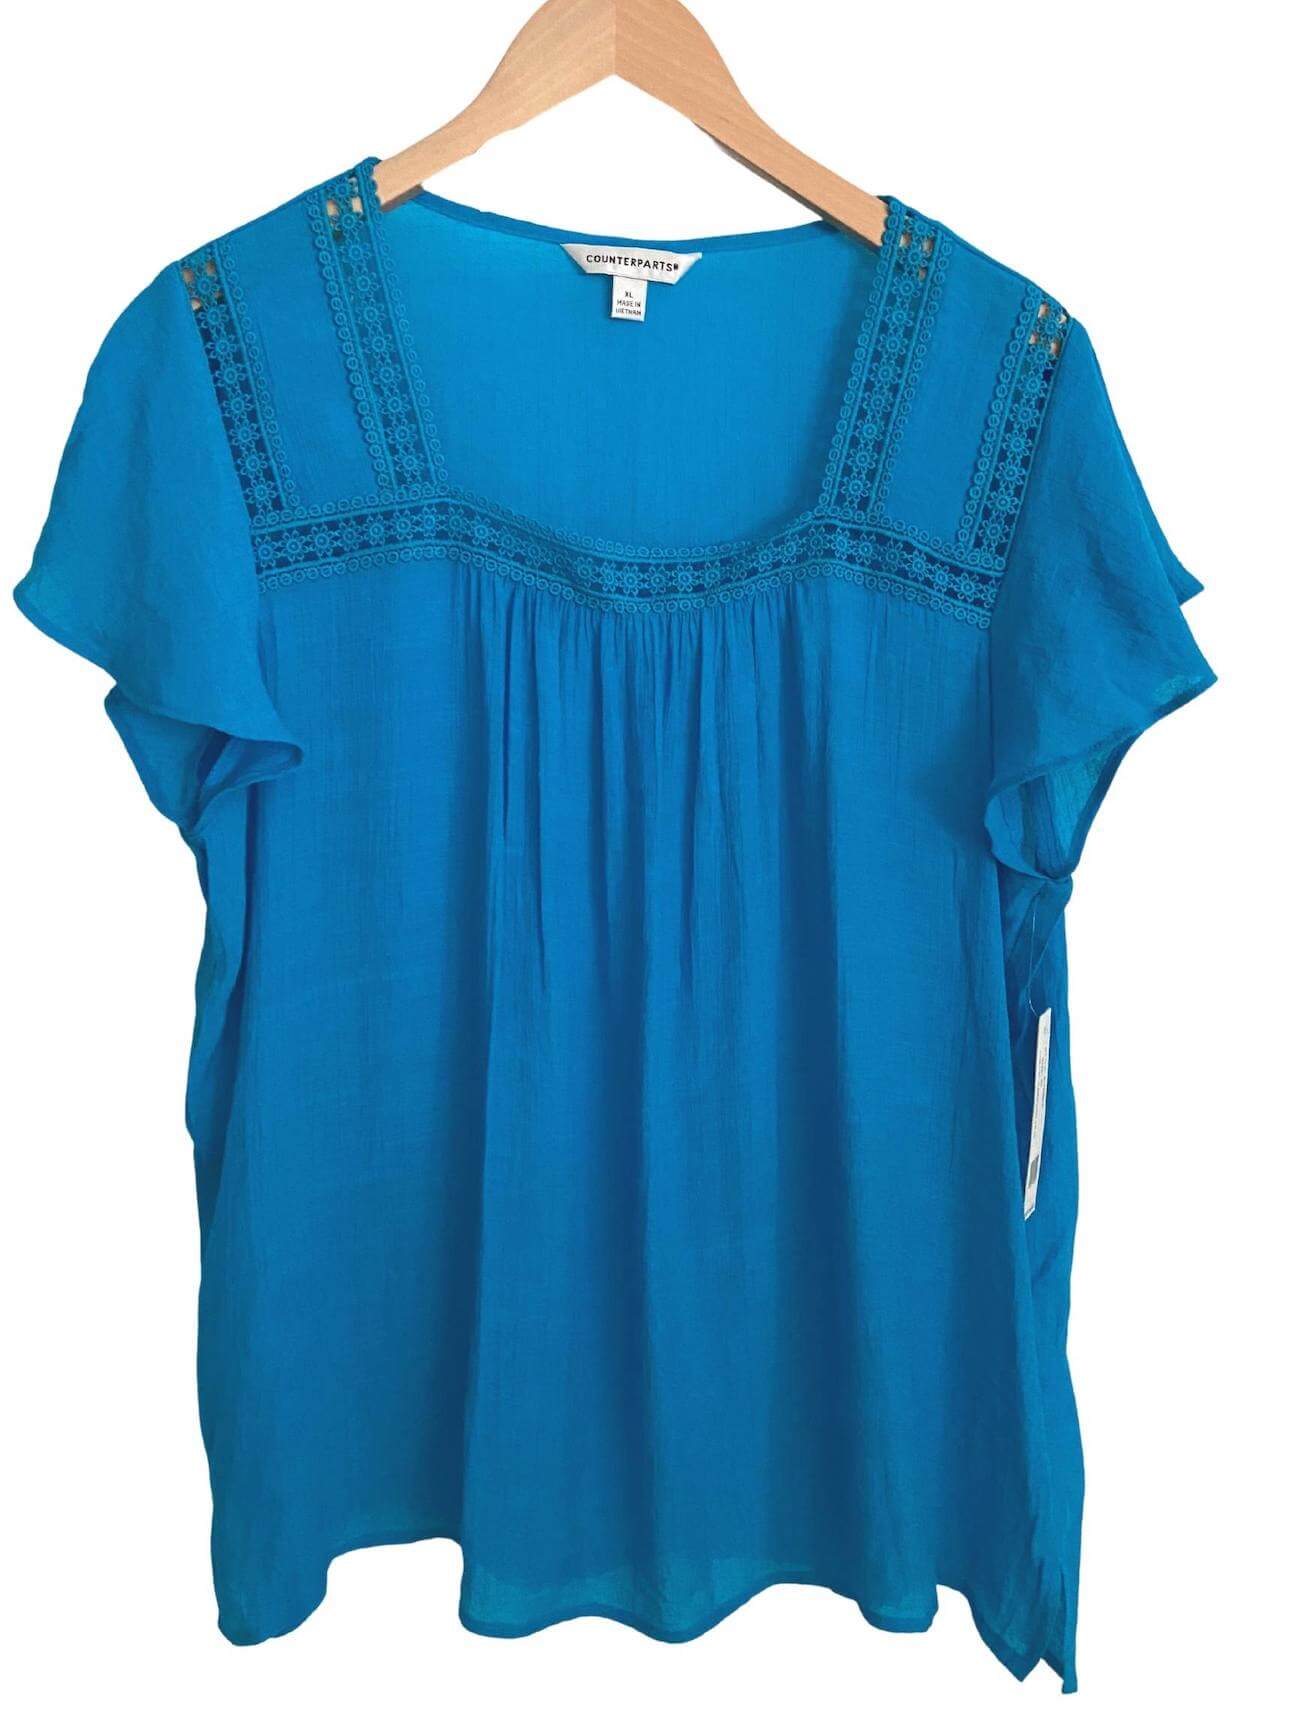 Bright Winter COUNTERPARTS teal crochet lace trim blouse